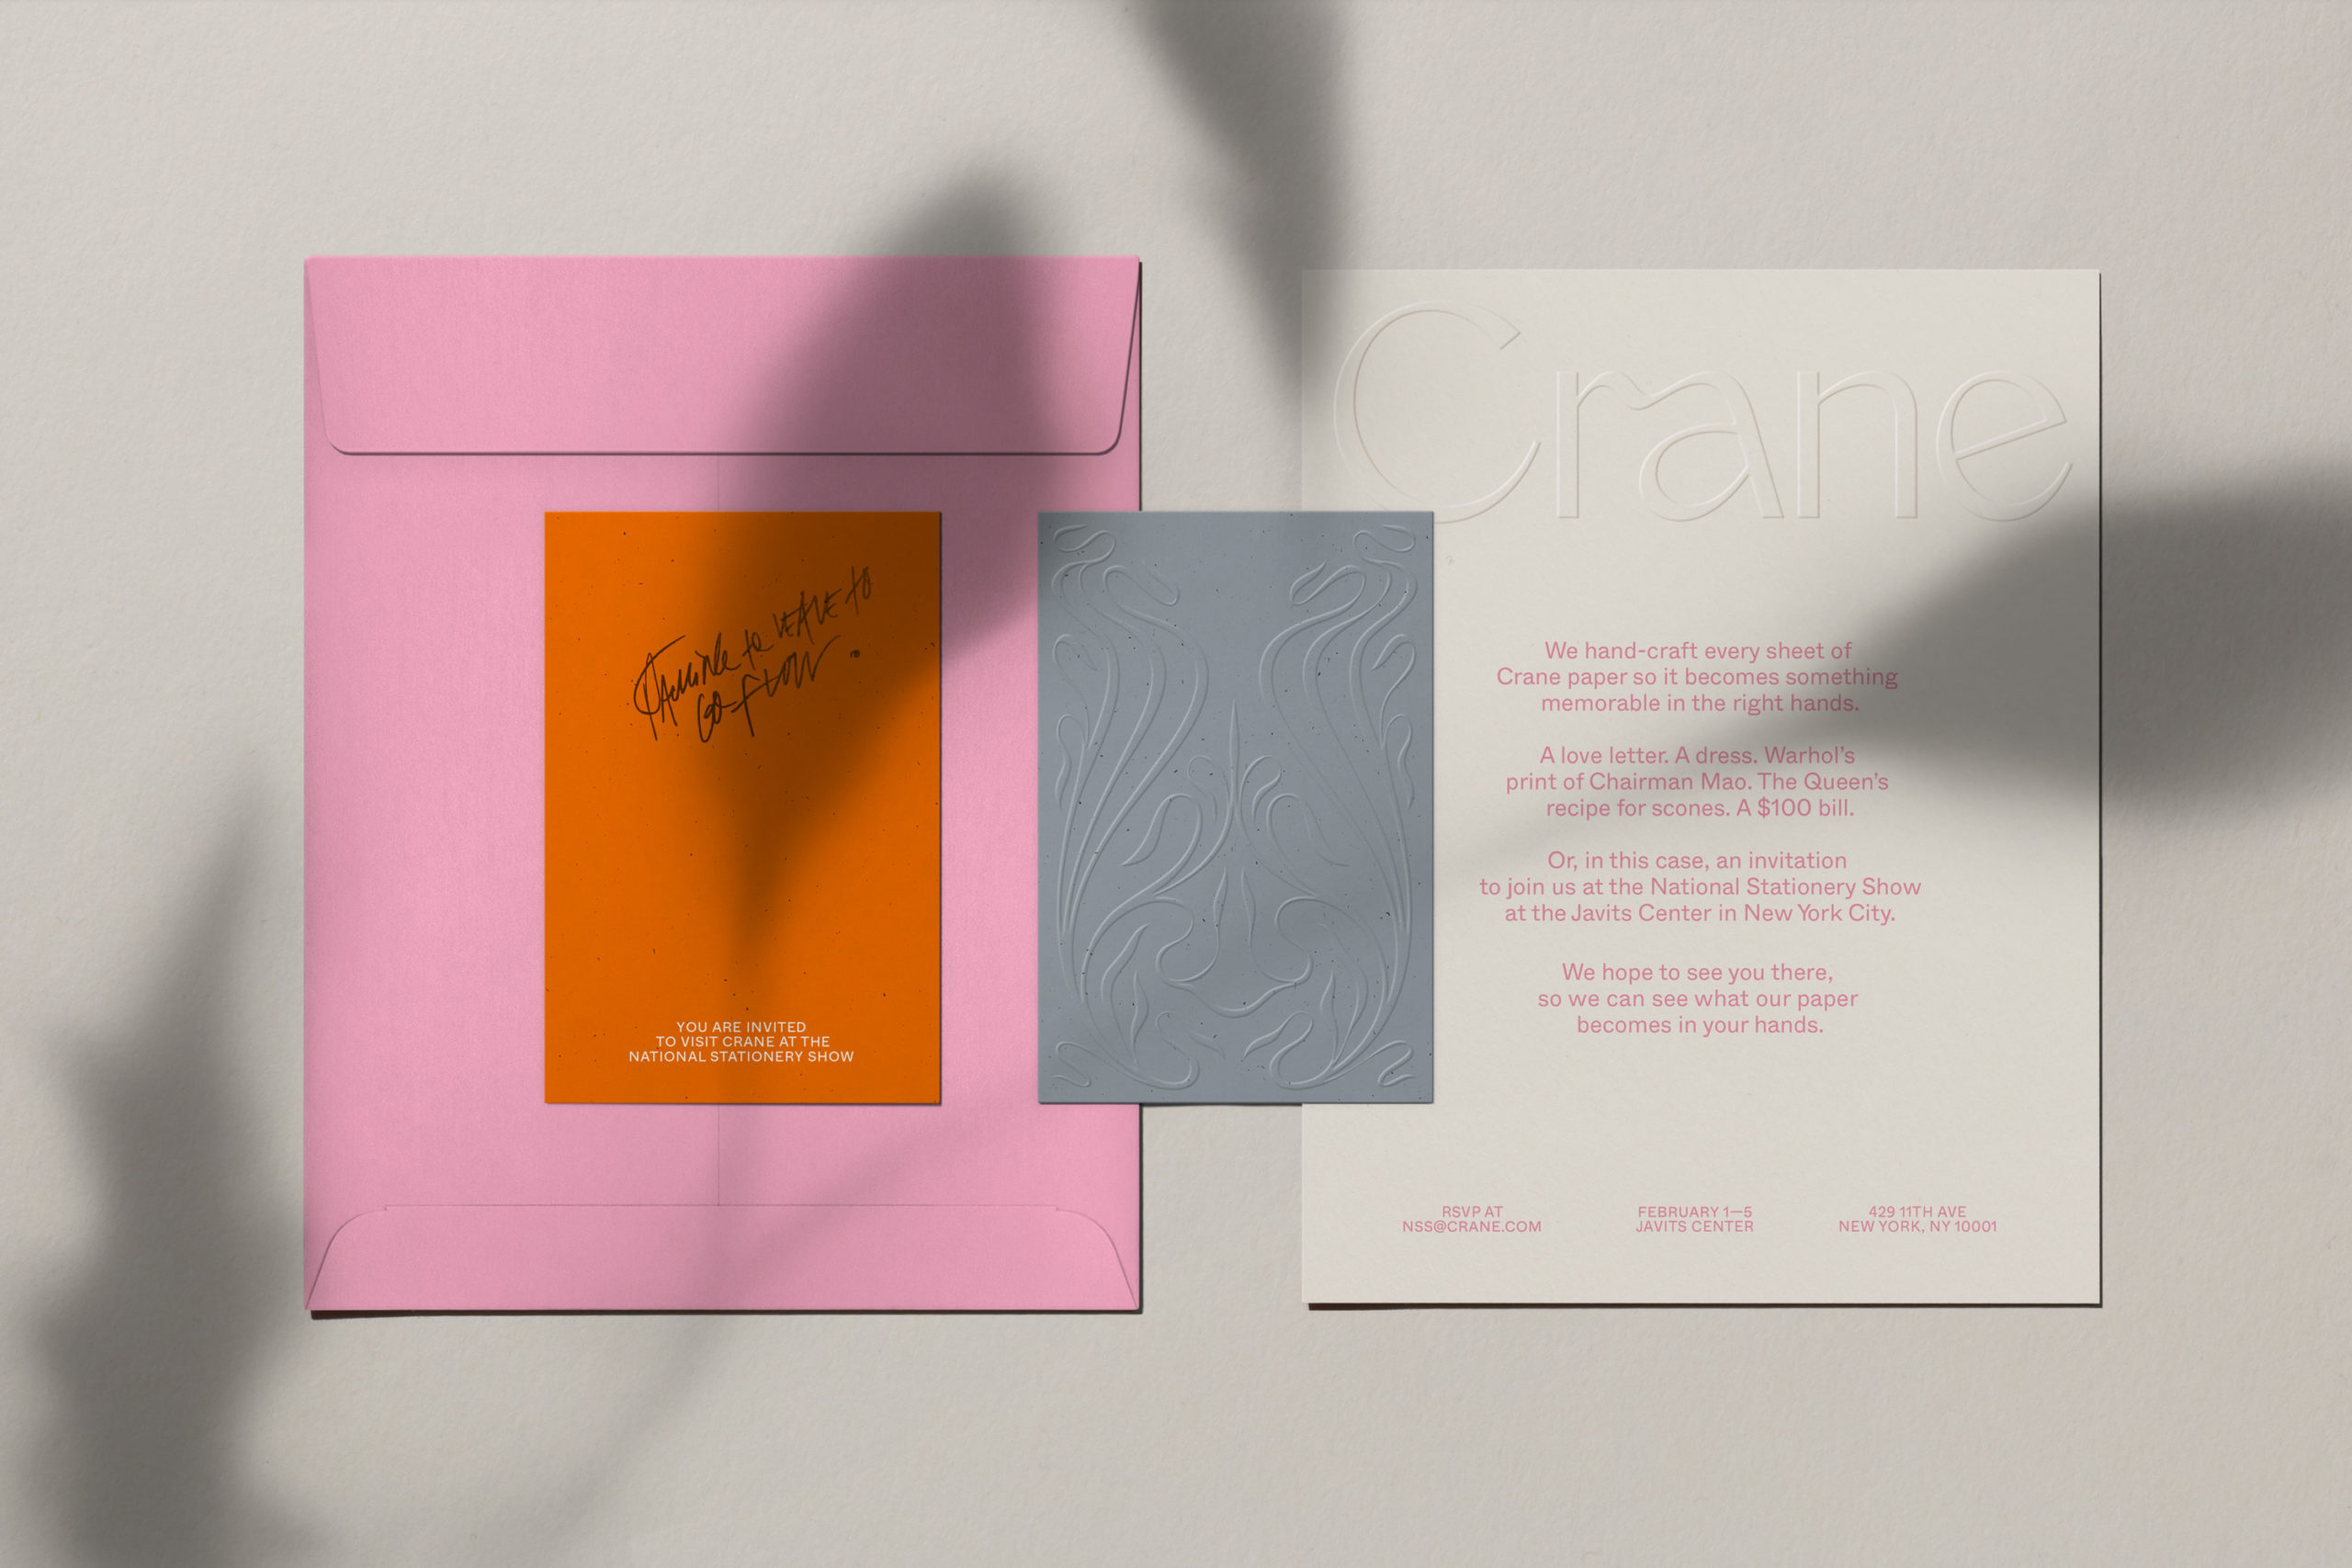 Brand identity and blind embossed stationery for American stationery and paper-maker Crane designed by Collins